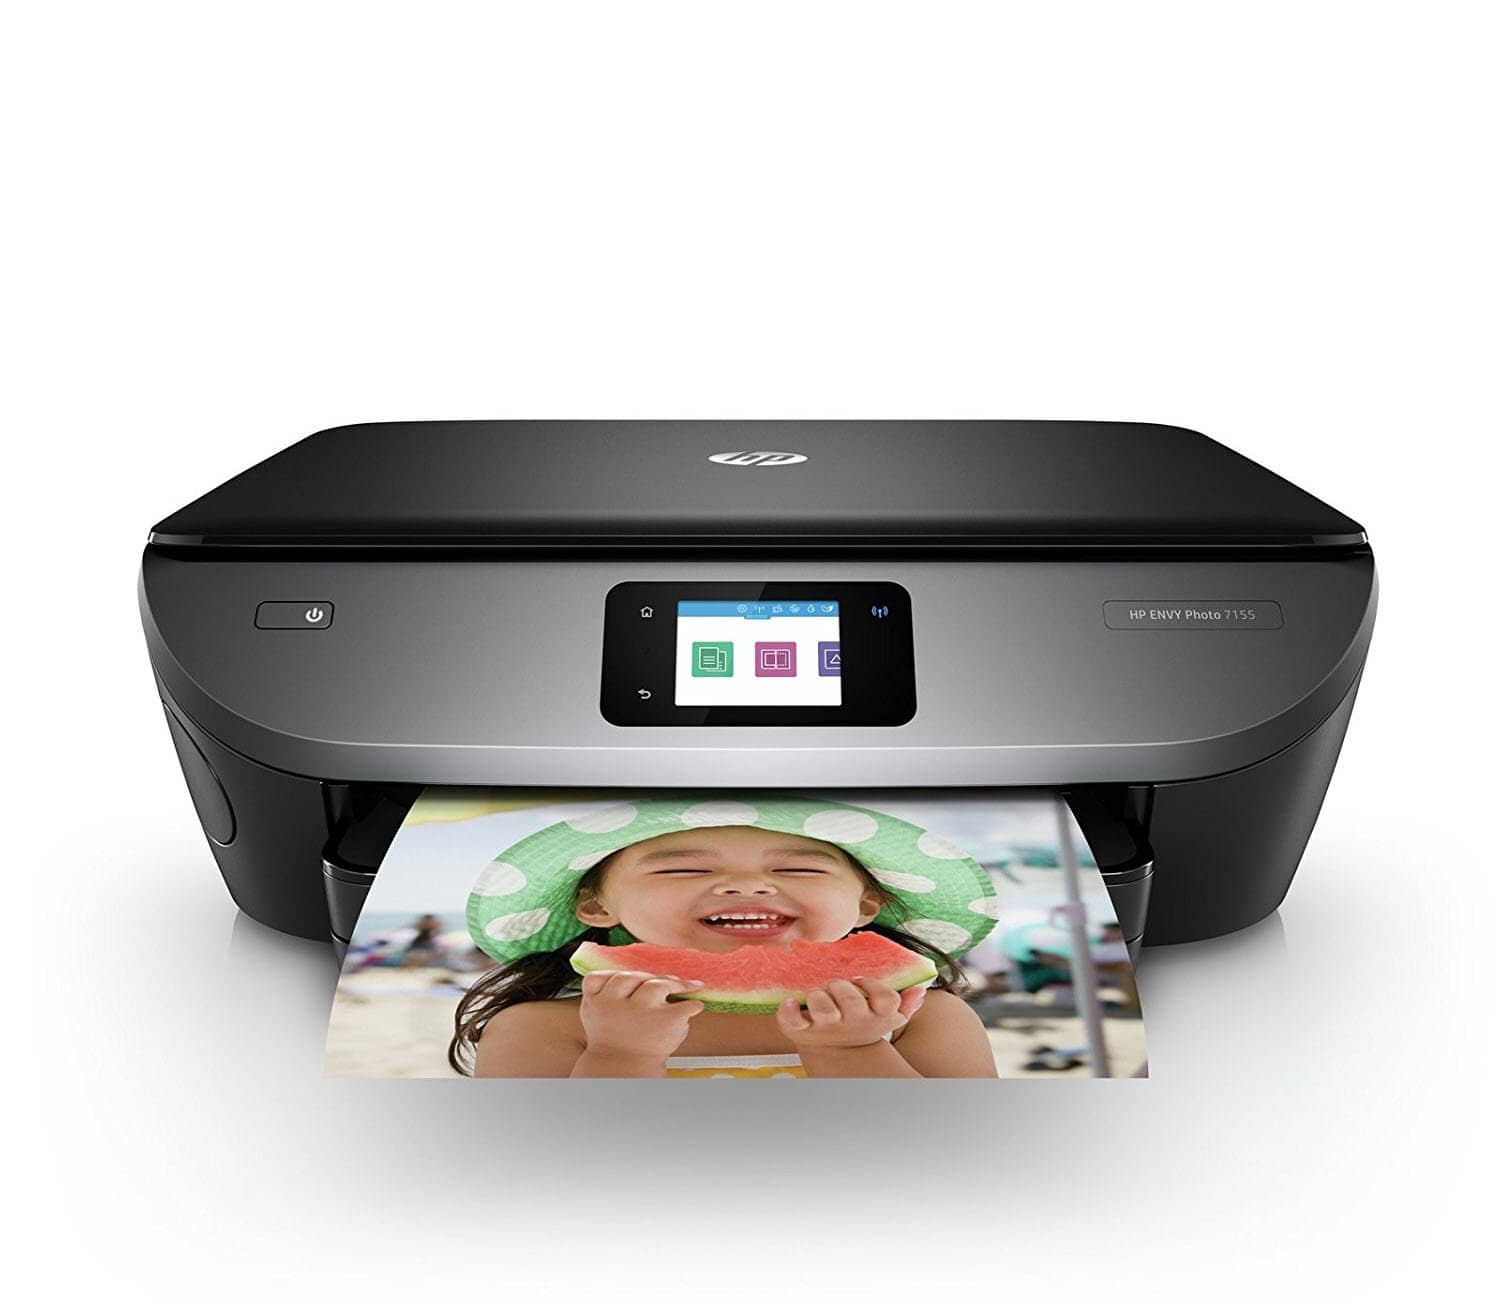 HP ENVY Photo 7155 and HP Instant Ink Bundle